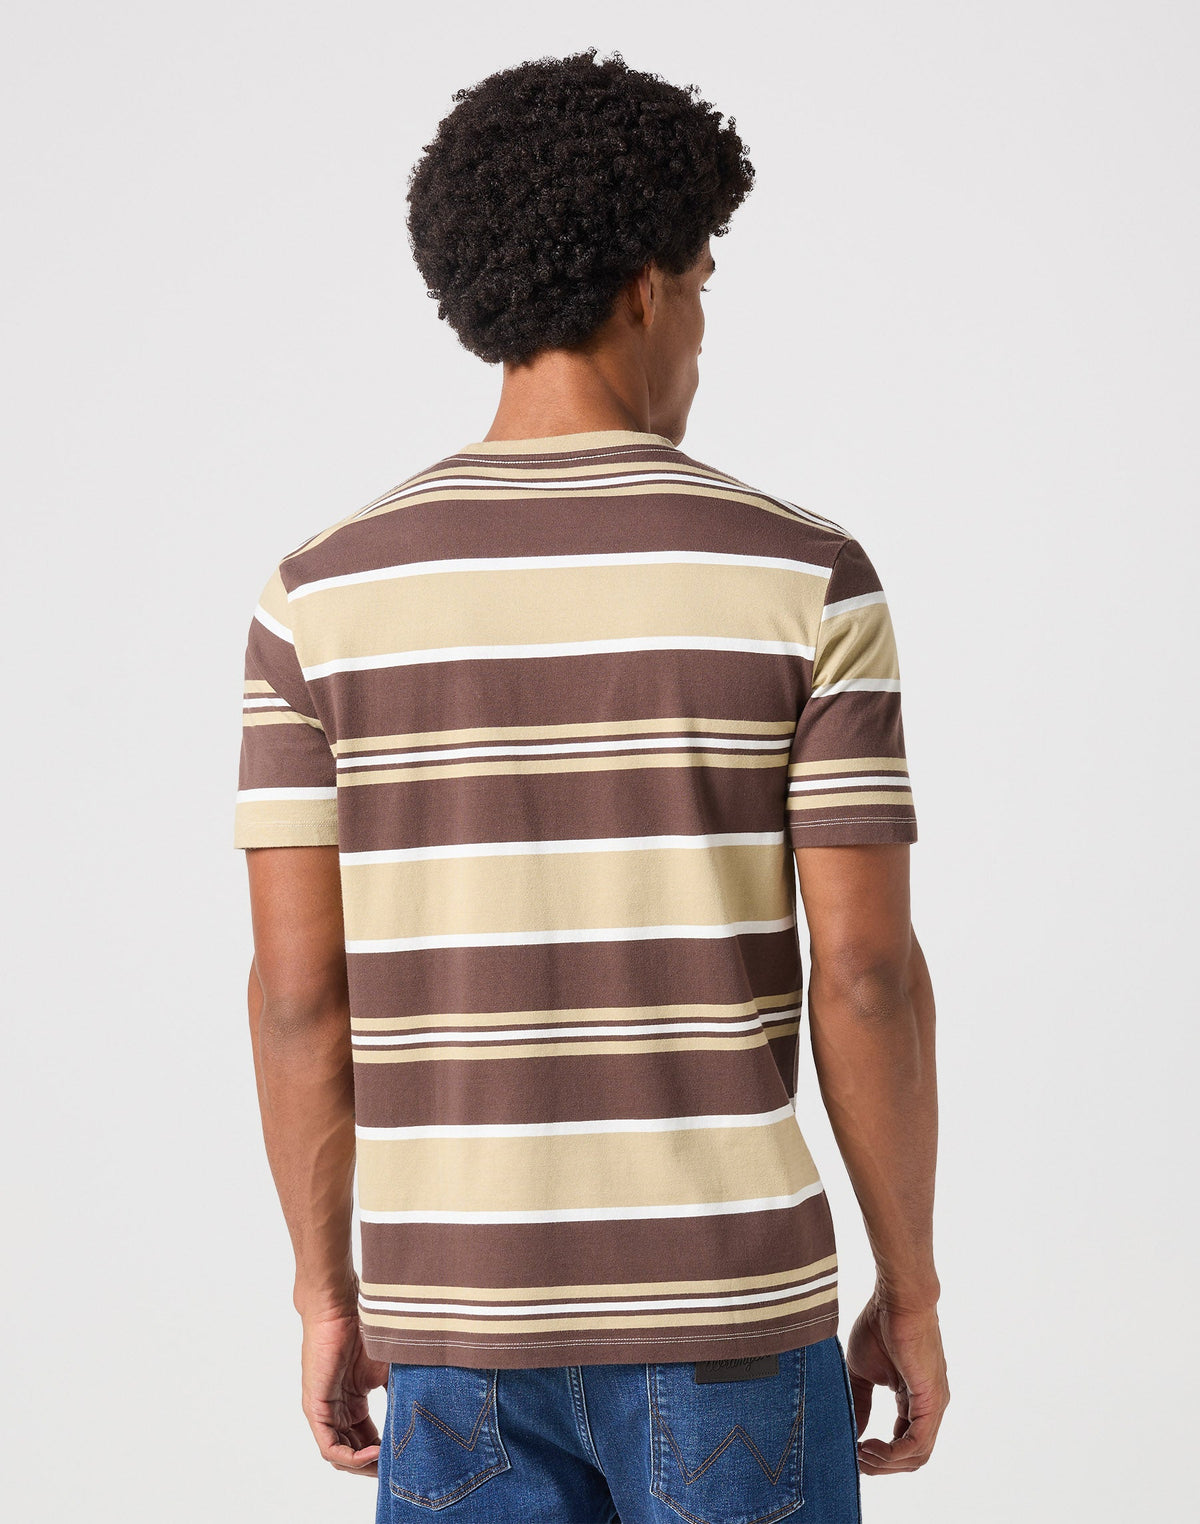 Pocket Tee in Plaza Taupe